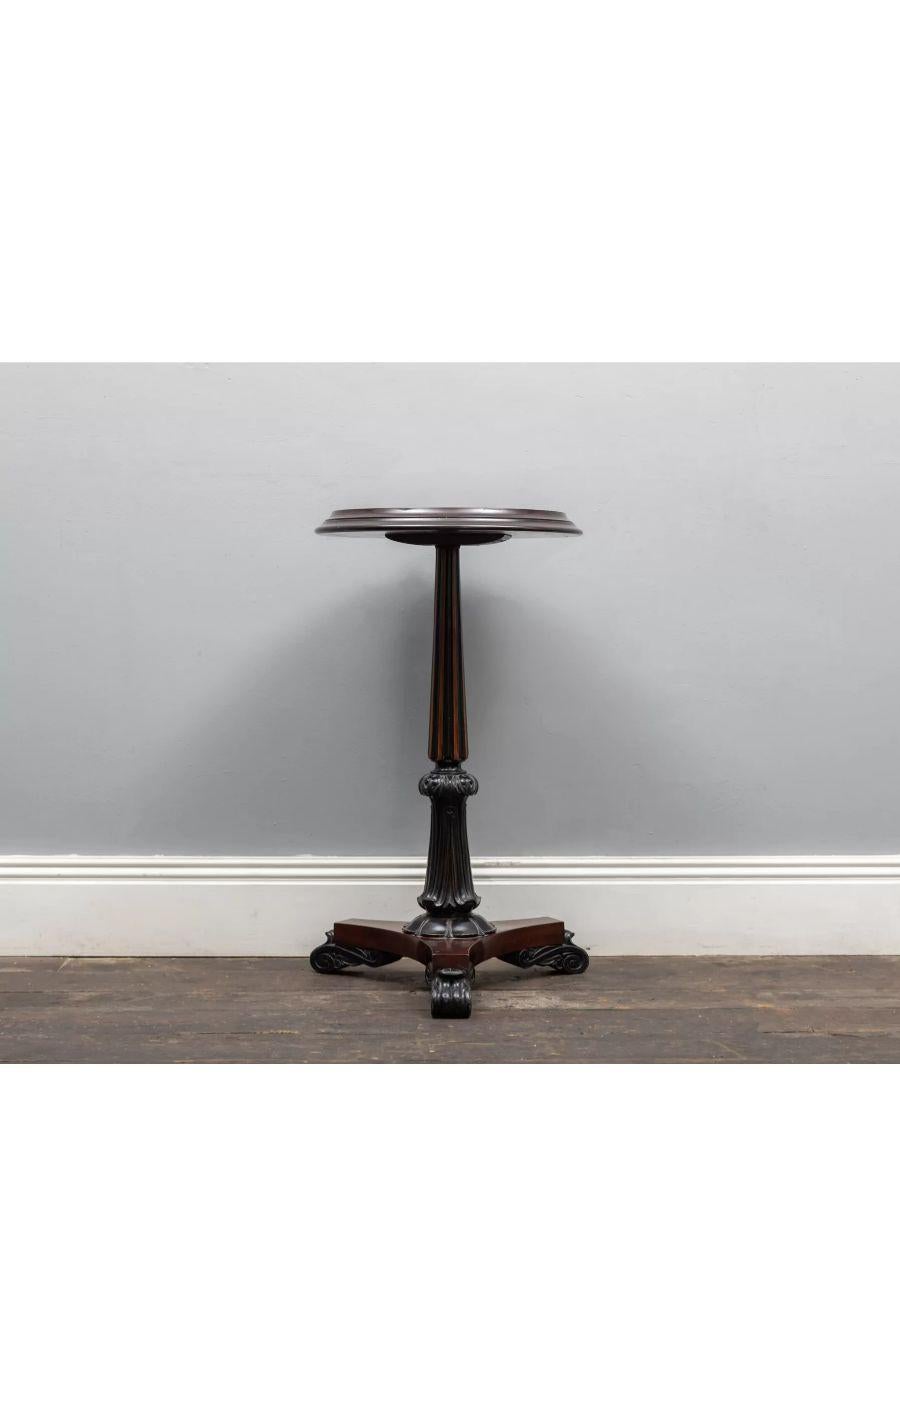 An antique mahogany occasional table with specimen marble and micro mosaic top.

The partially ebonized mahogany base comprises of a fluted and gadrooned stem on a tri-form plinth base with raised acanthus-leaf feet.

The inset circular top has